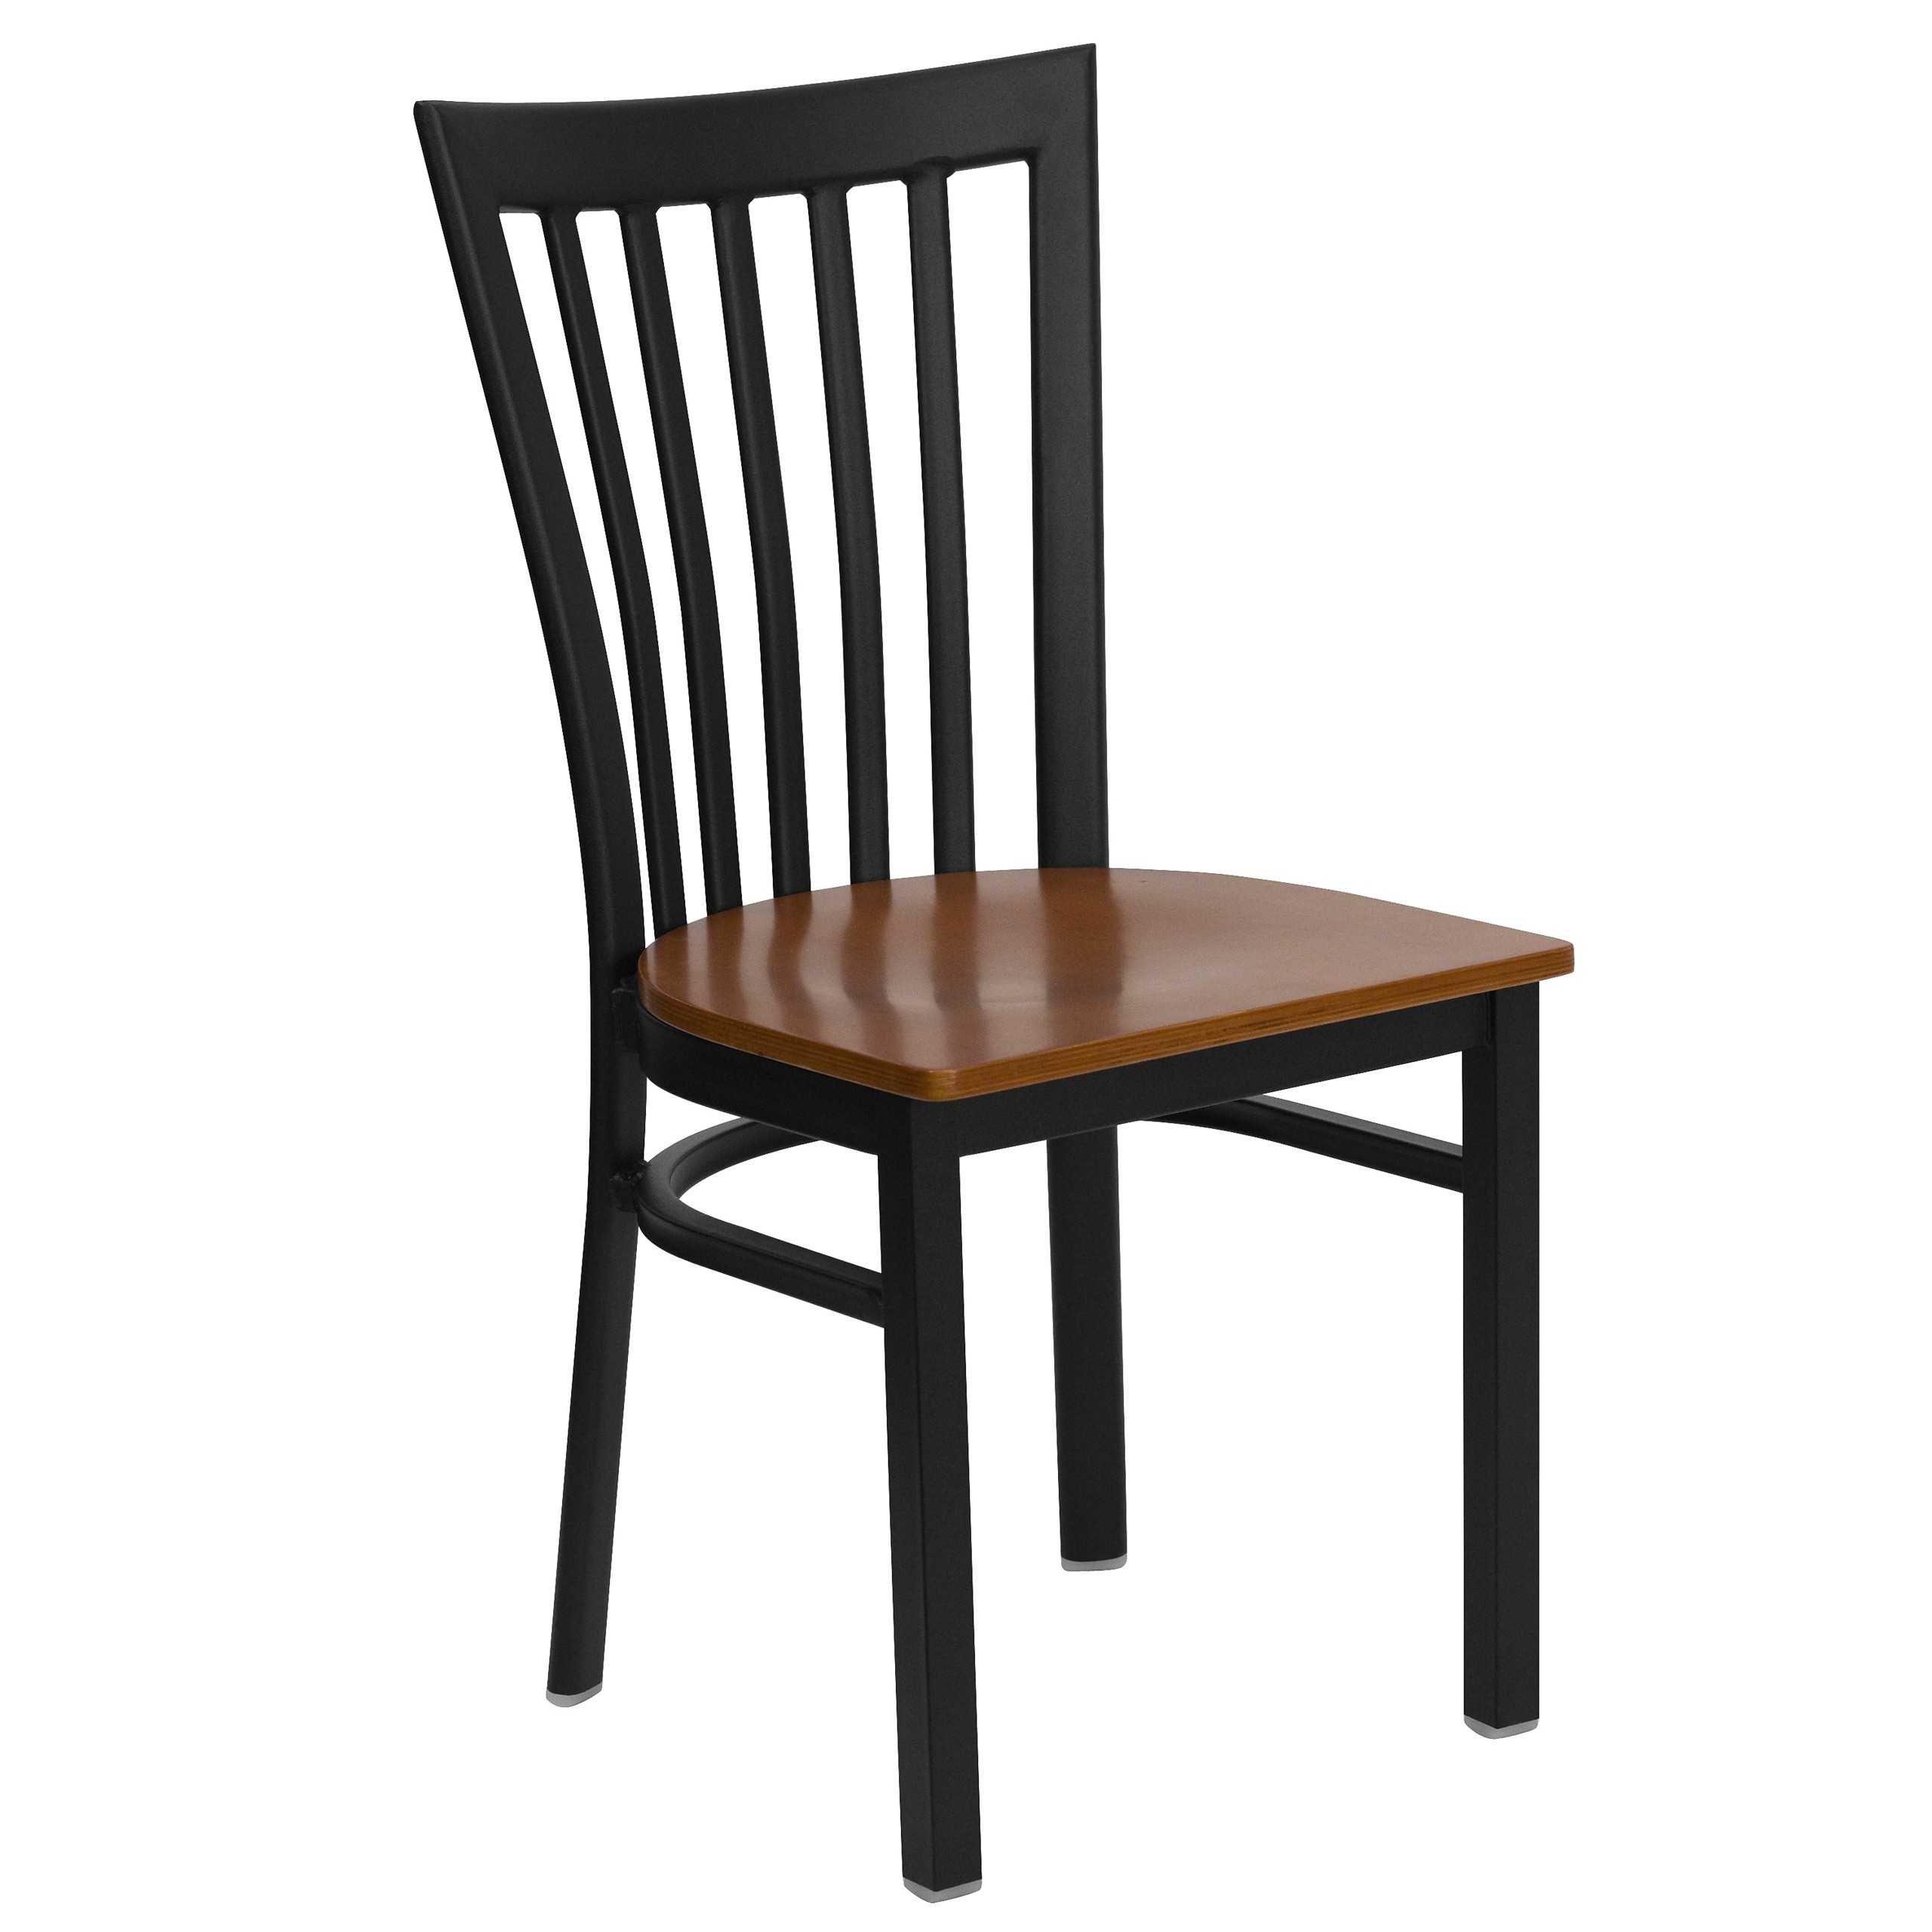 Black school house back metal restaurant chair with cherry wood